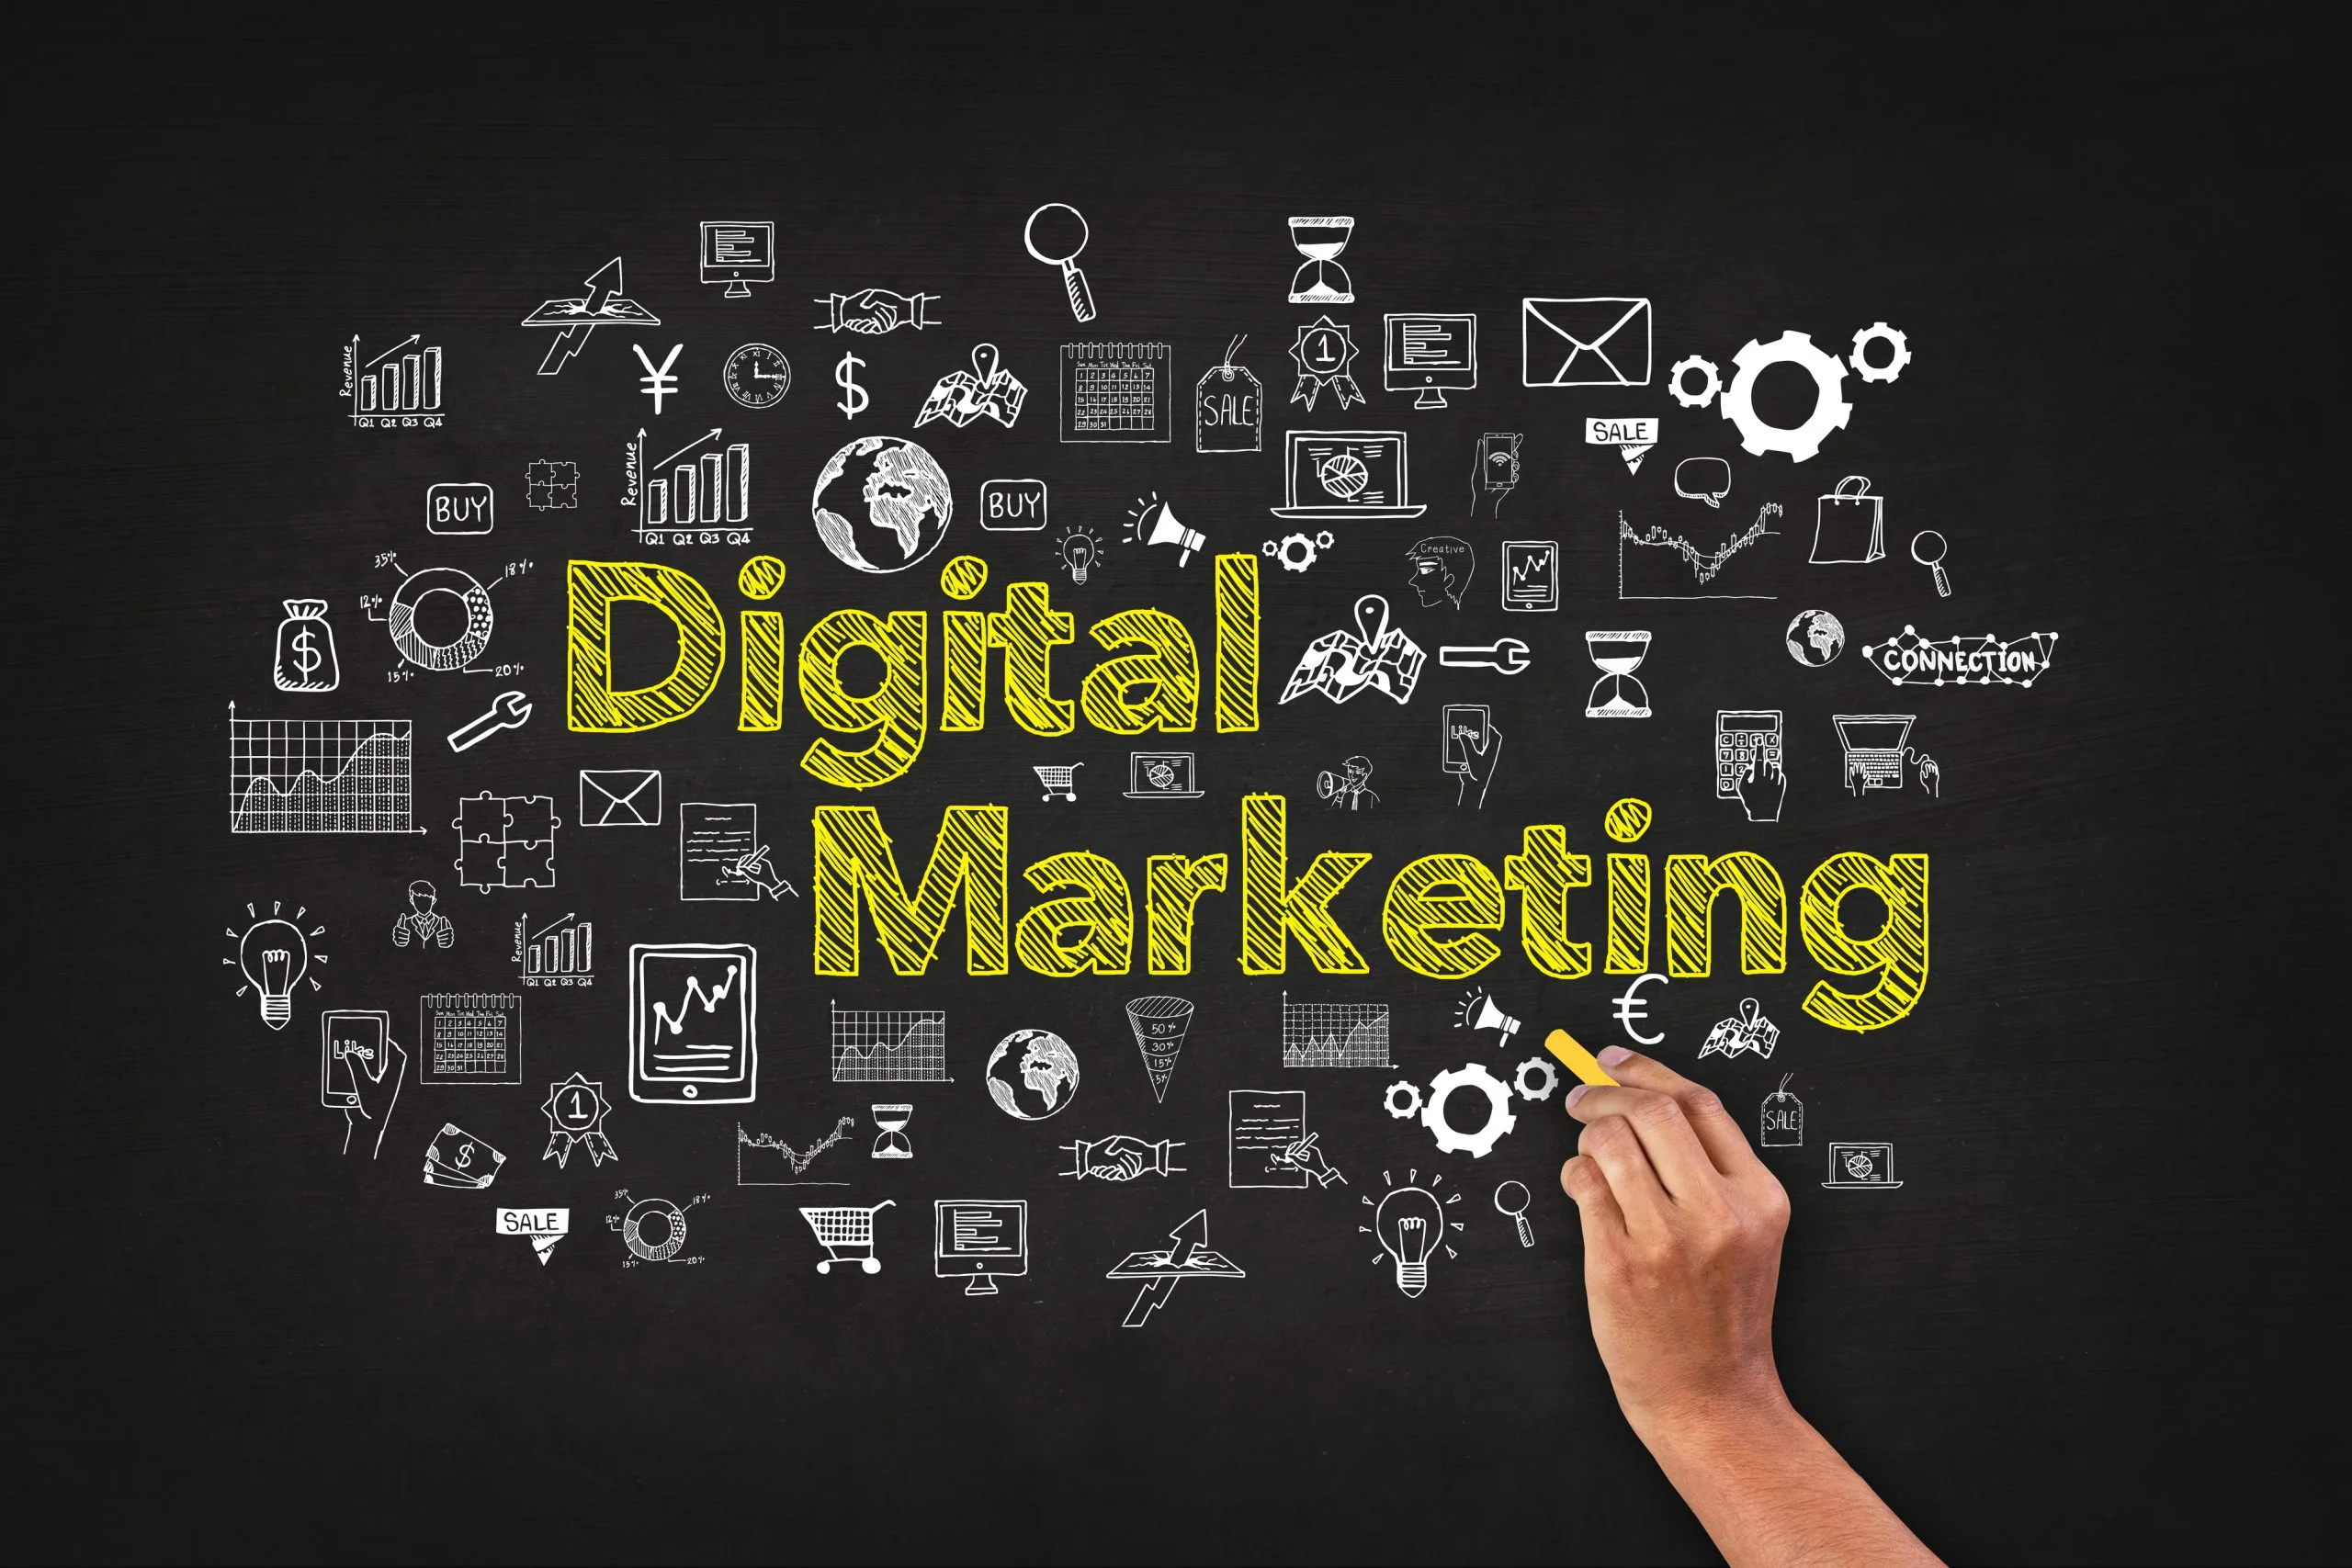 boost-your-online presence-with-digital-marketing-agency-in-uae